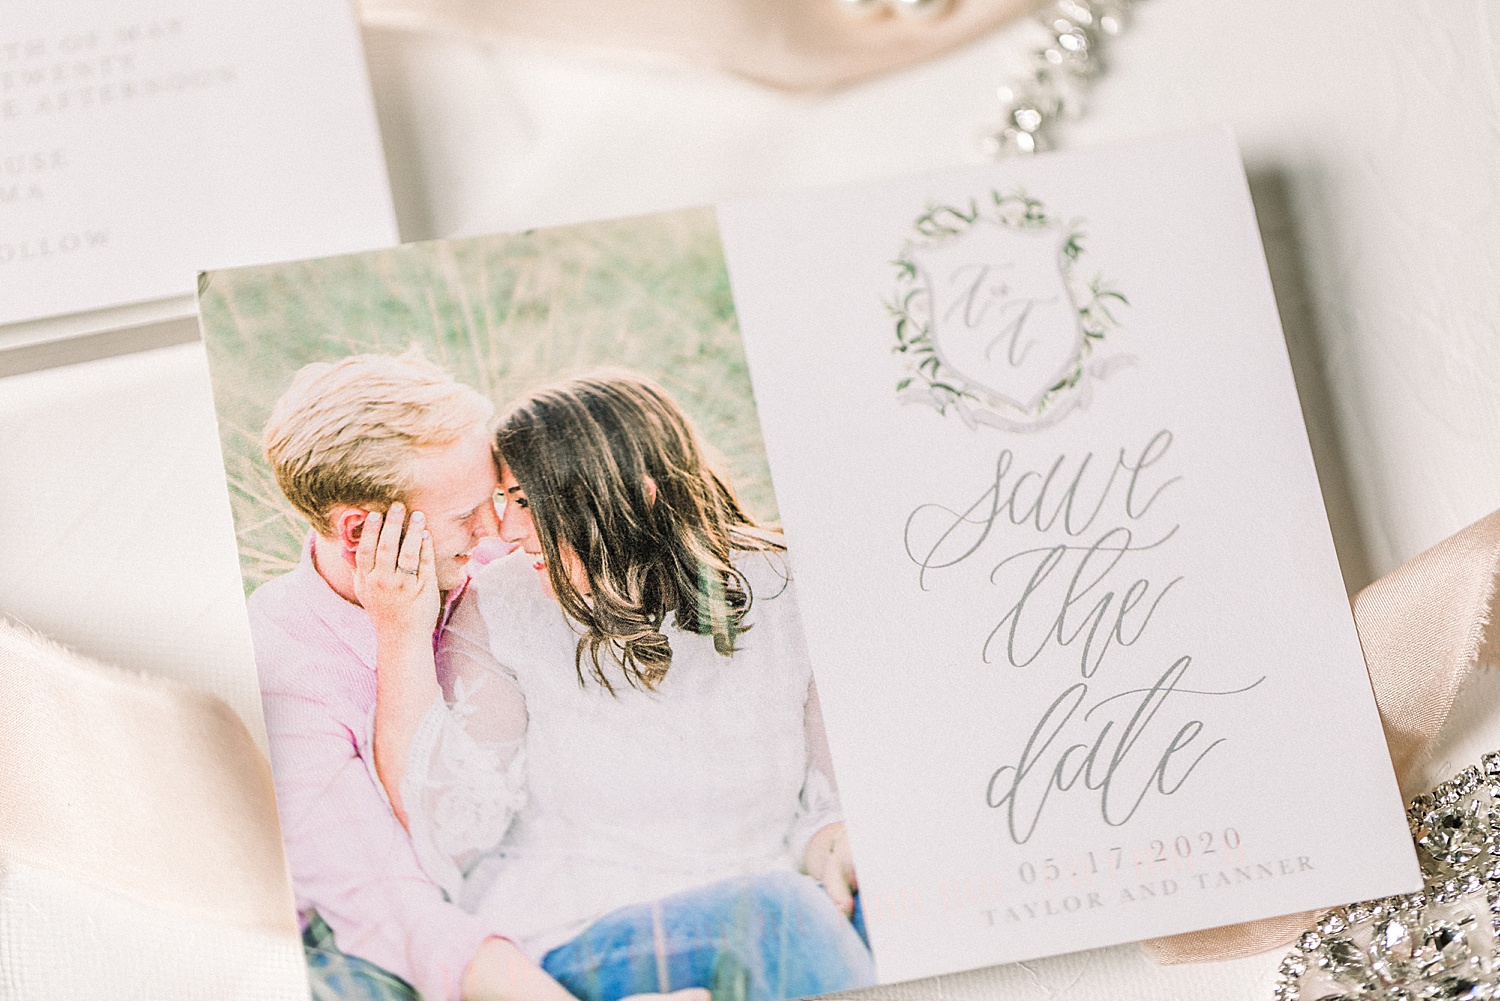 Save the Dates from The Sonnet House wedding in Alabama